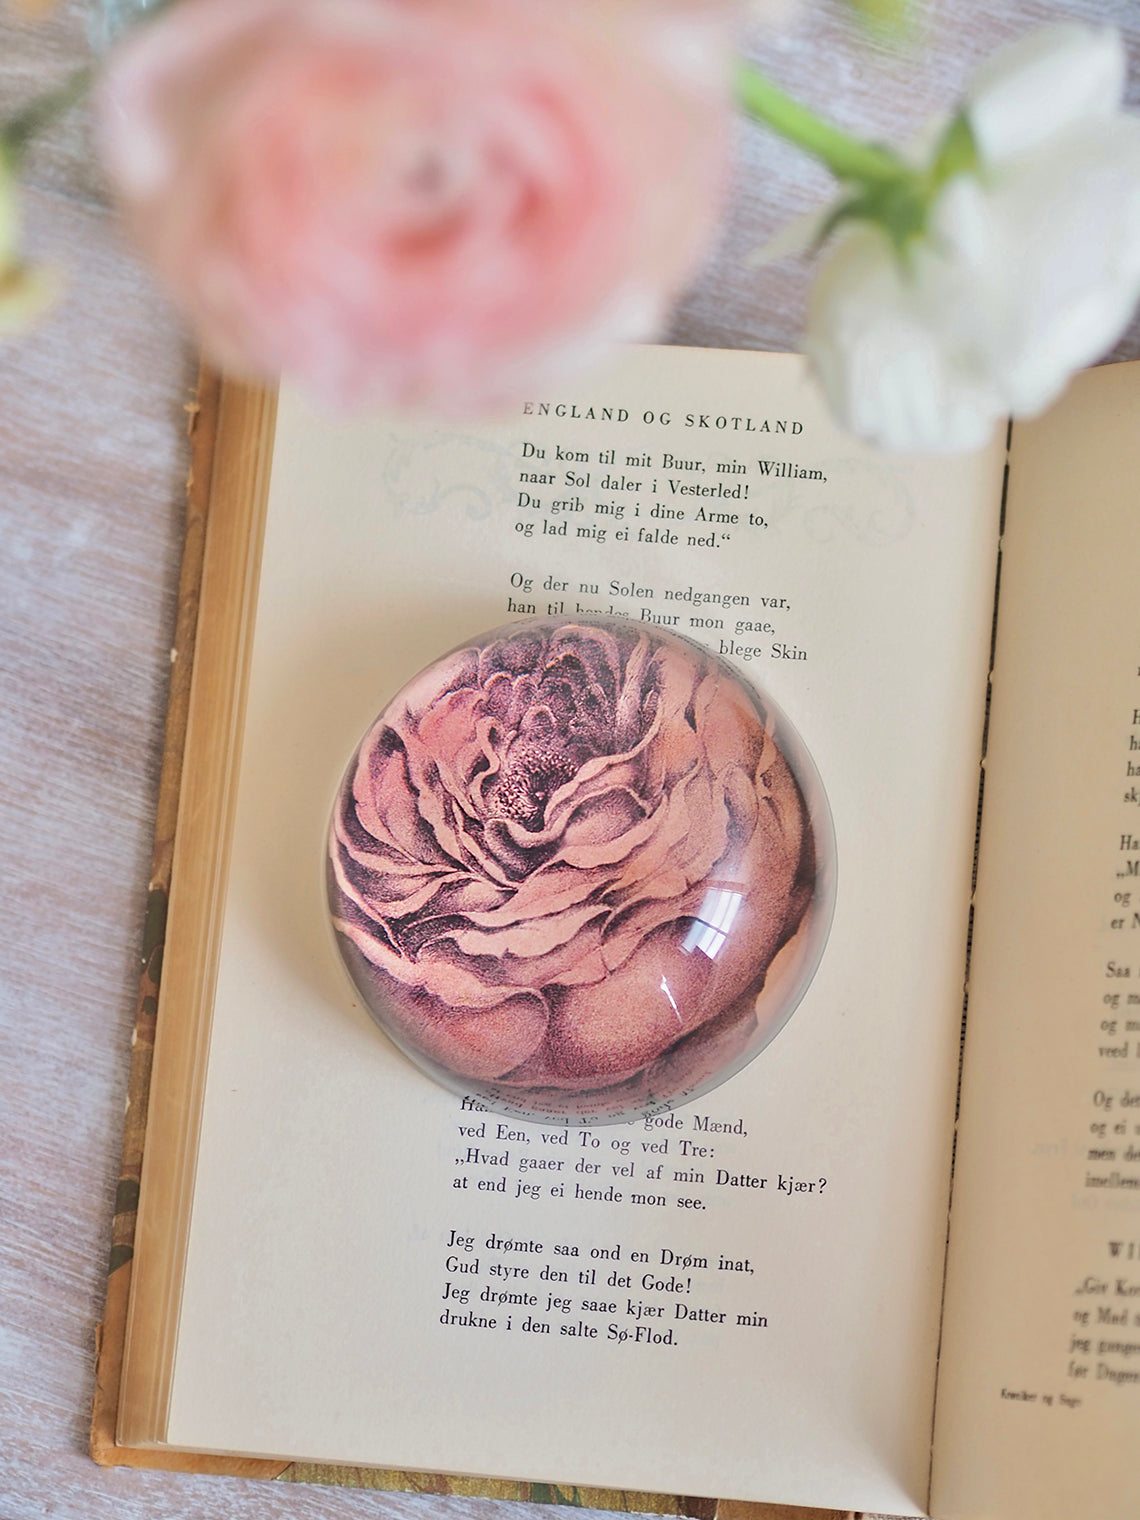 Rose of May Dome Paperweight